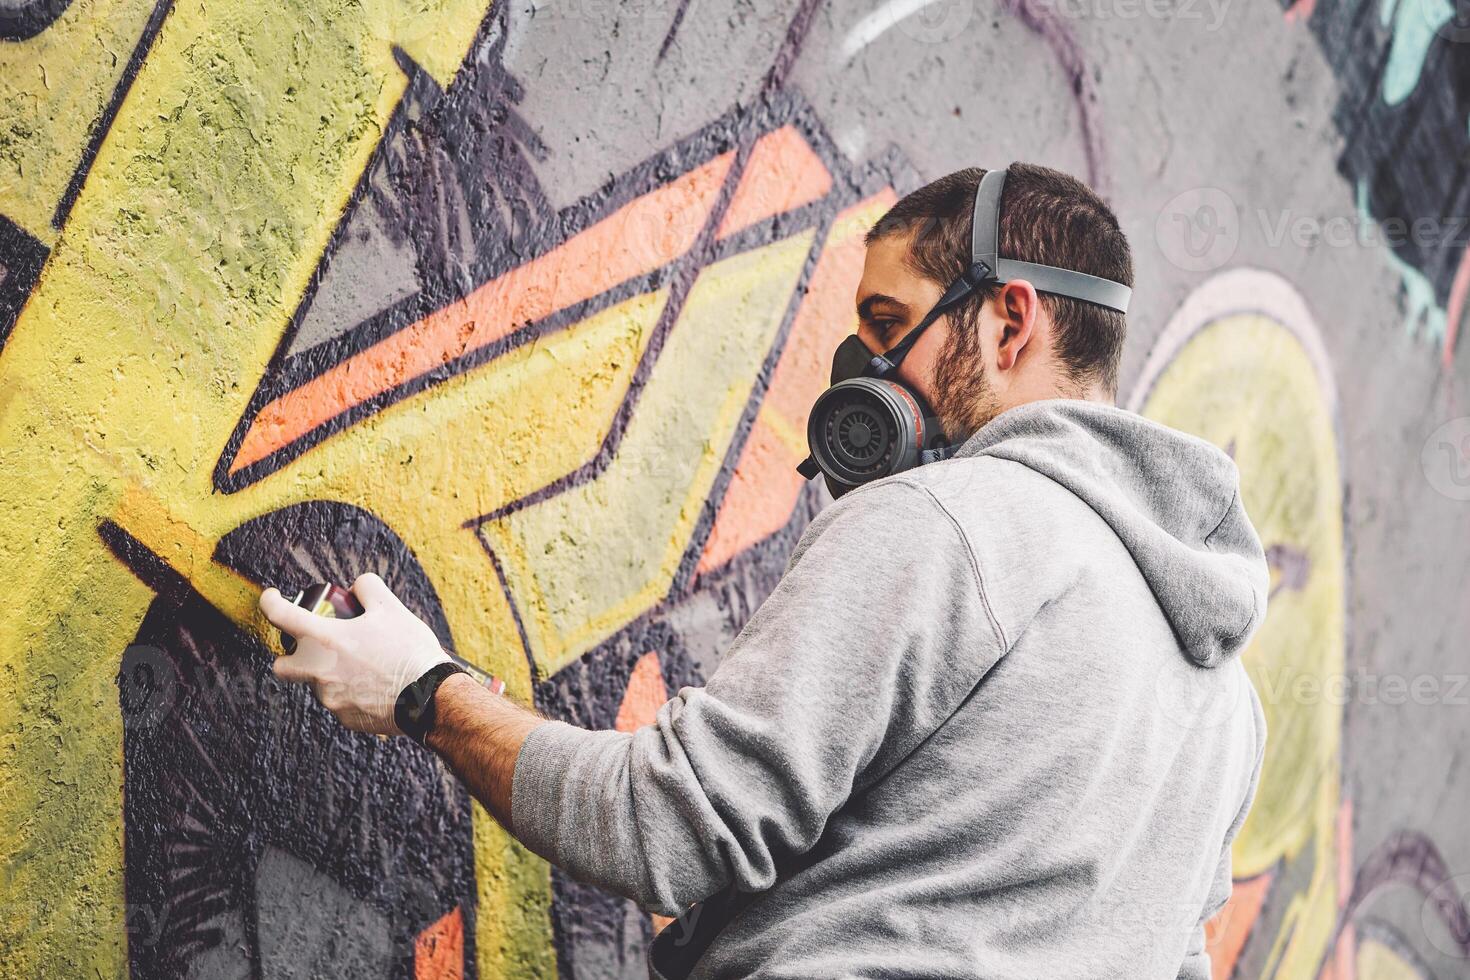 Street graffiti artist painting with a color spray can a graffiti on the wall in the city - Urban, lifestyle street art concept photo